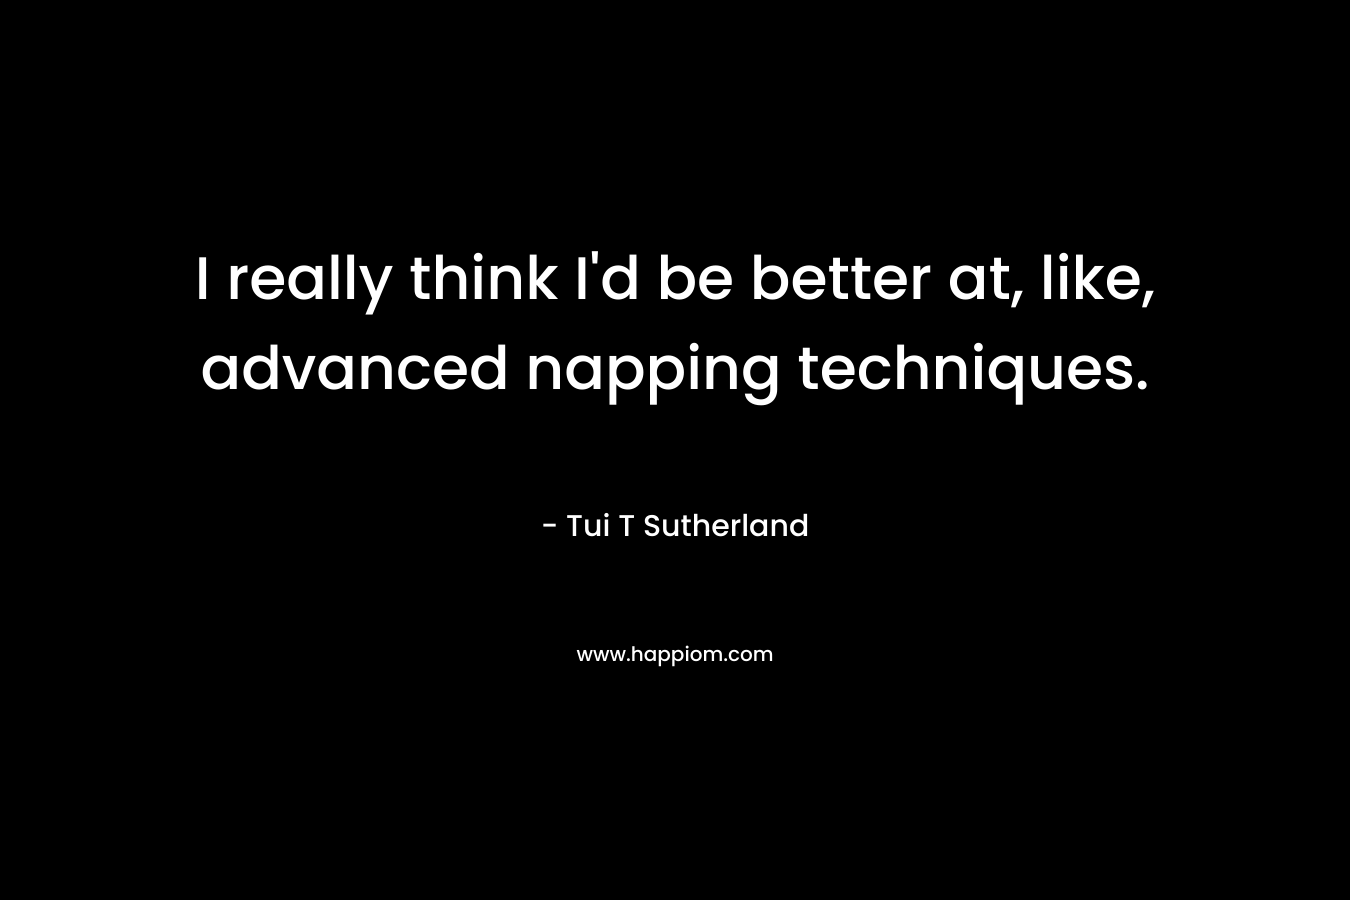 I really think I’d be better at, like, advanced napping techniques. – Tui T Sutherland